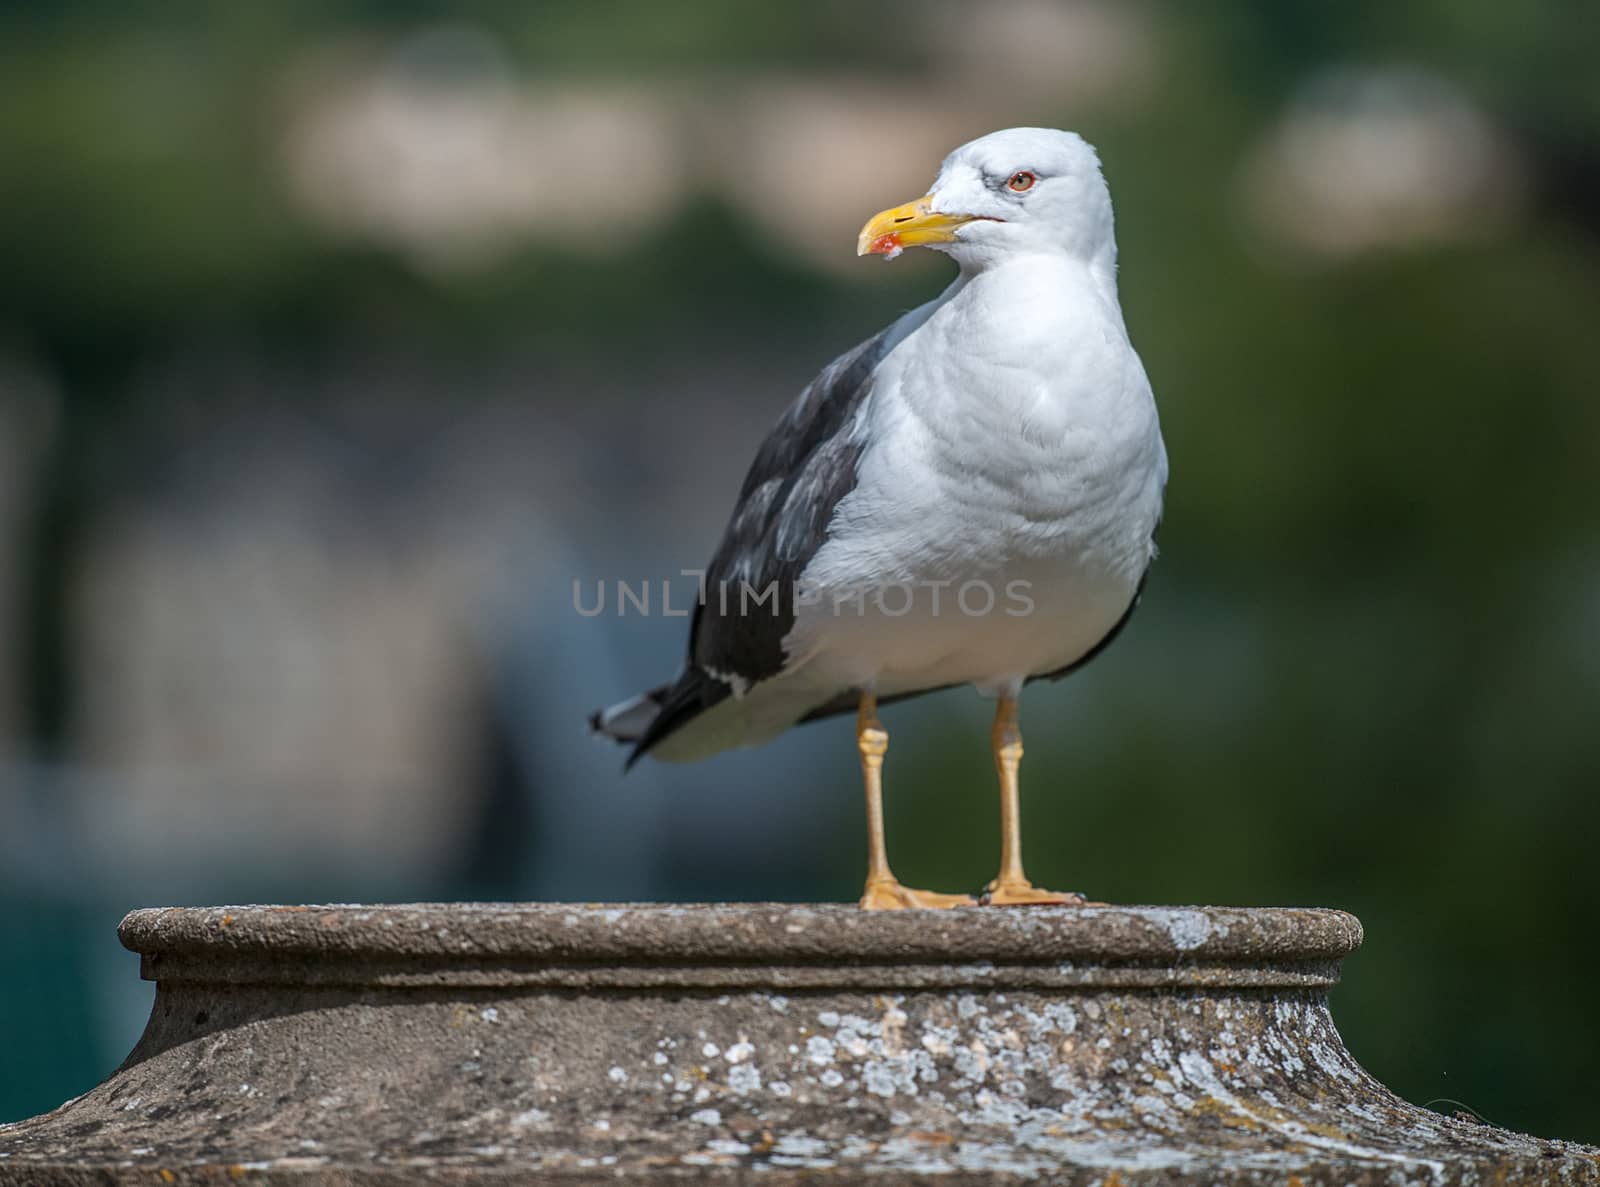 seagull perched on wall looking around